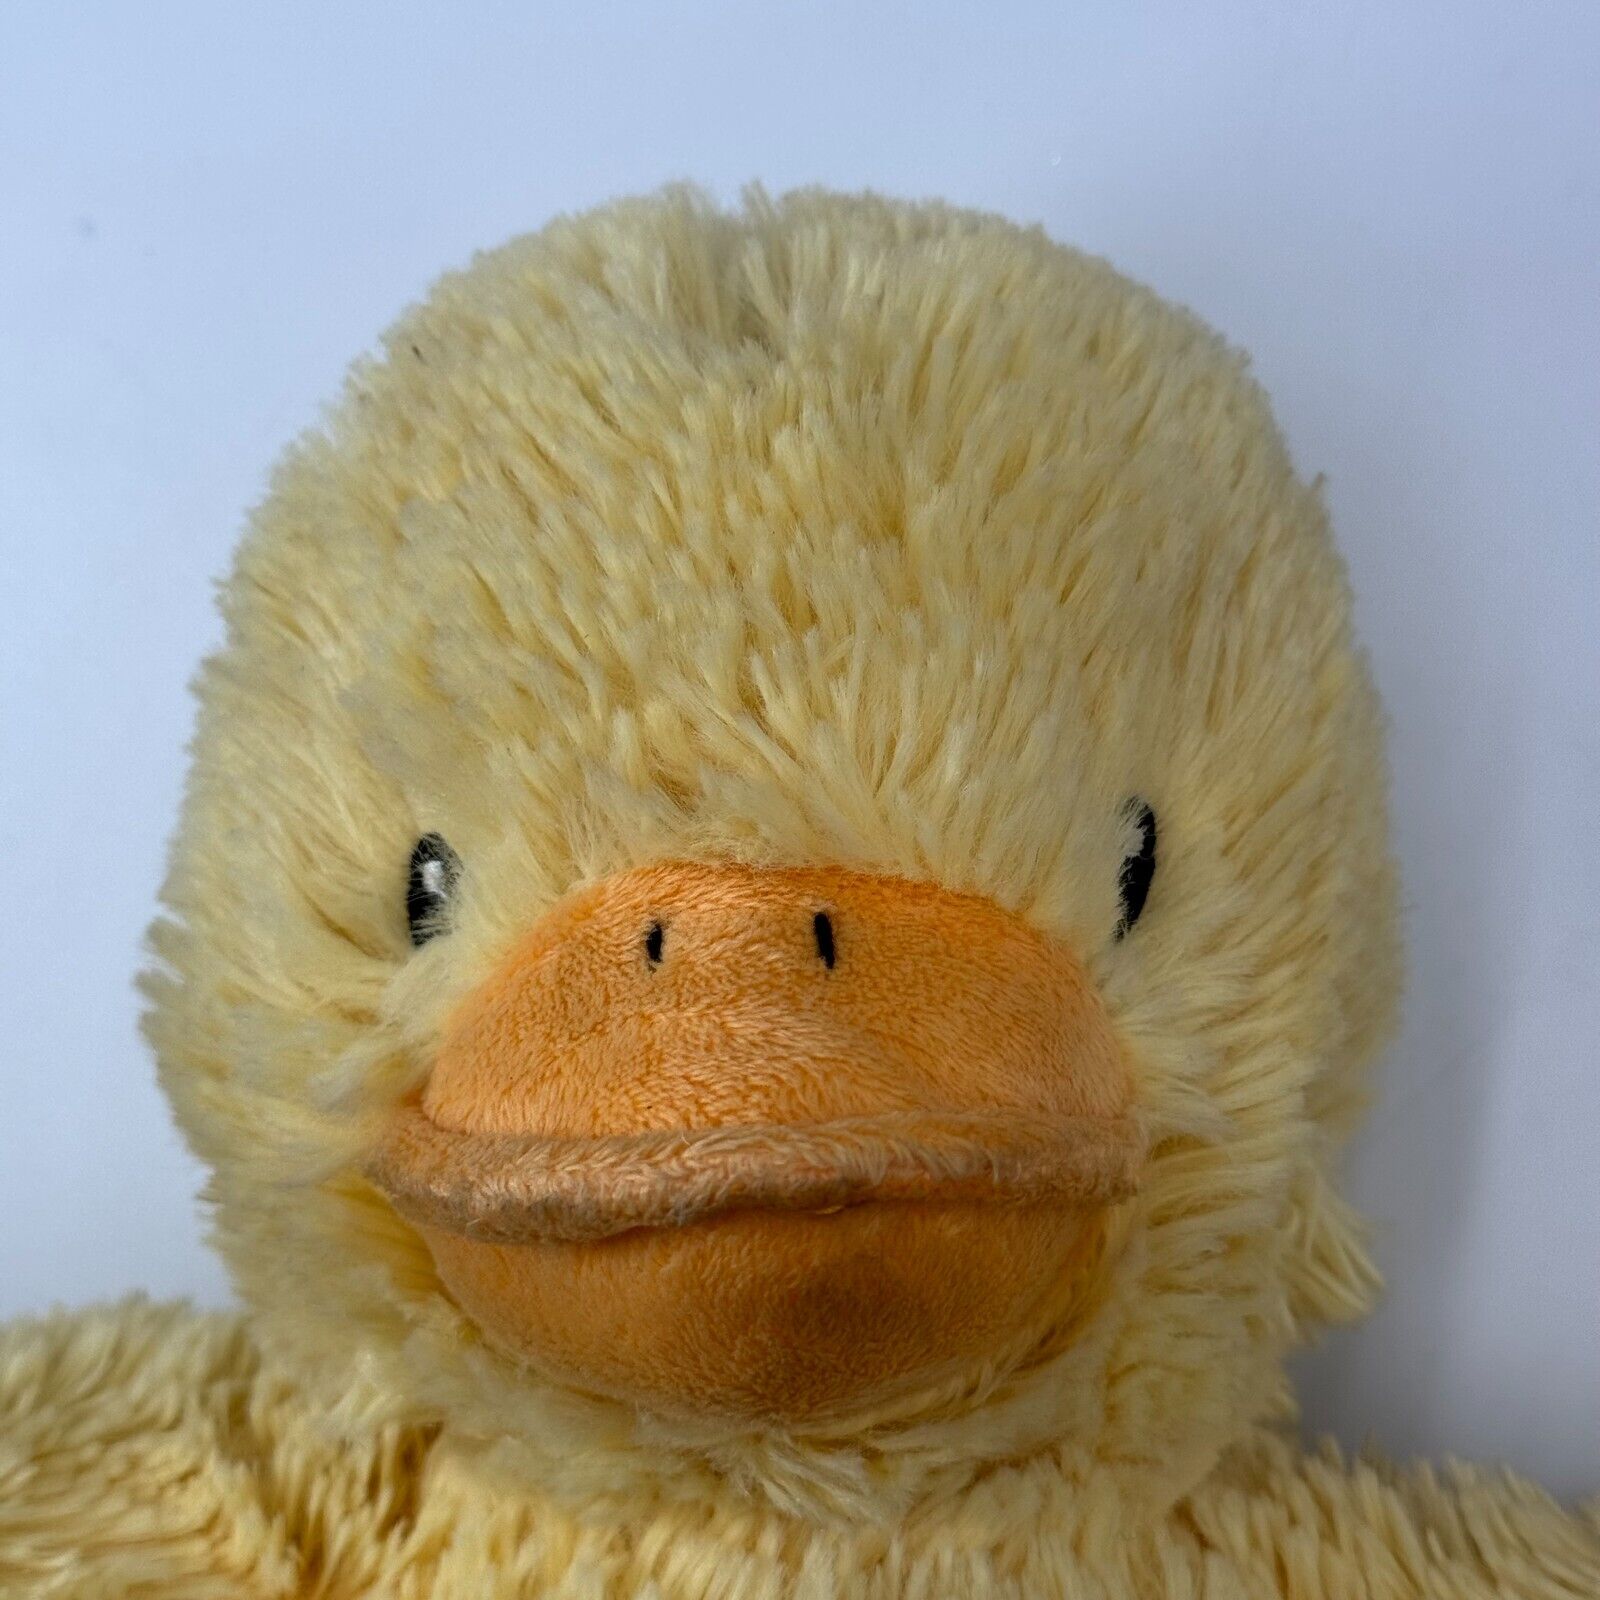 Vintage Duck Collection Rubber Bath Ducky Fuzzy Stuffed Animal Yellow Grad